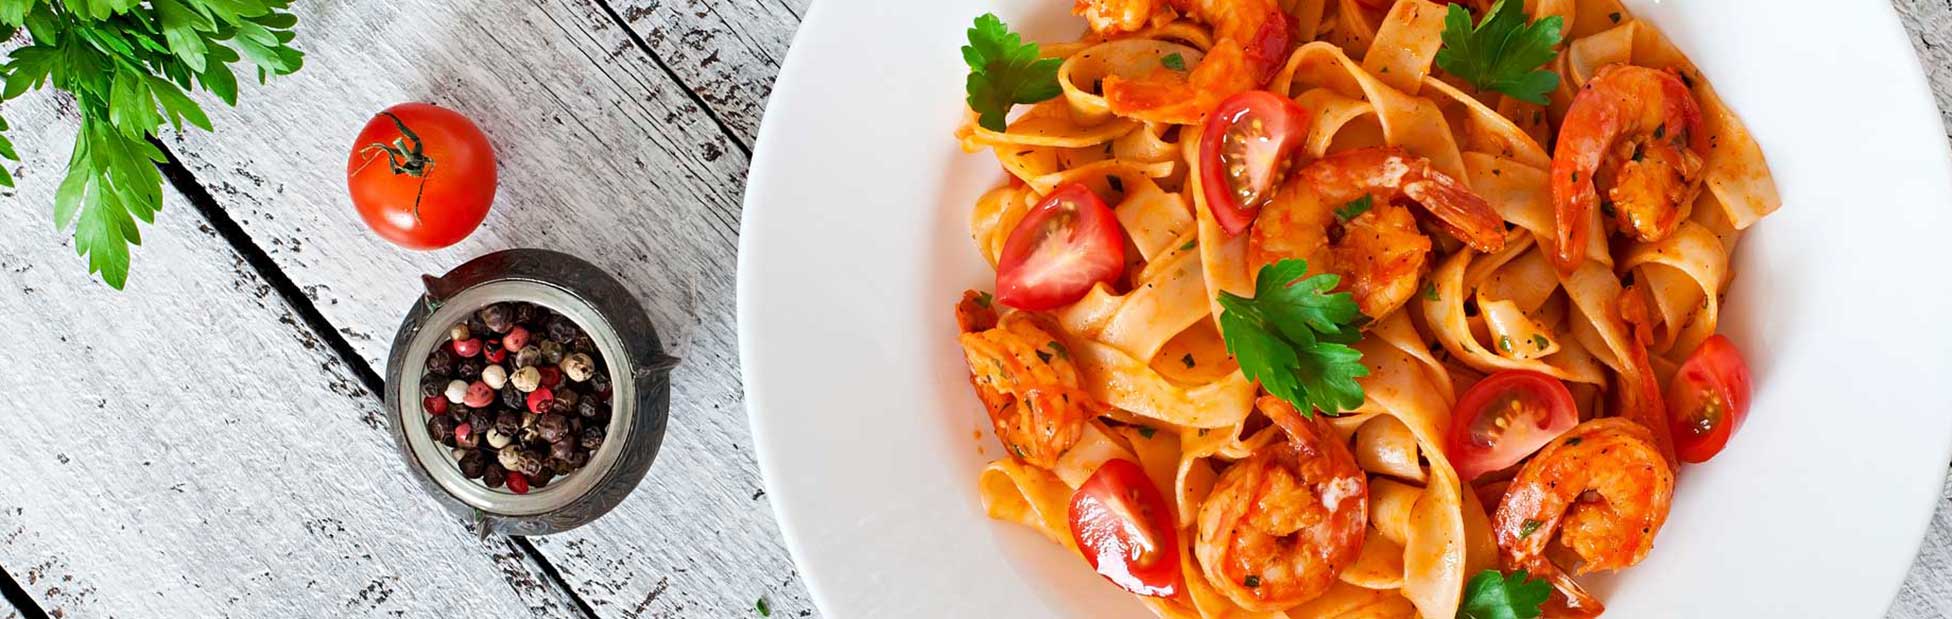 A dish of pasta on a table accompanied by a bowl of pepper corns and a whole tomatoe